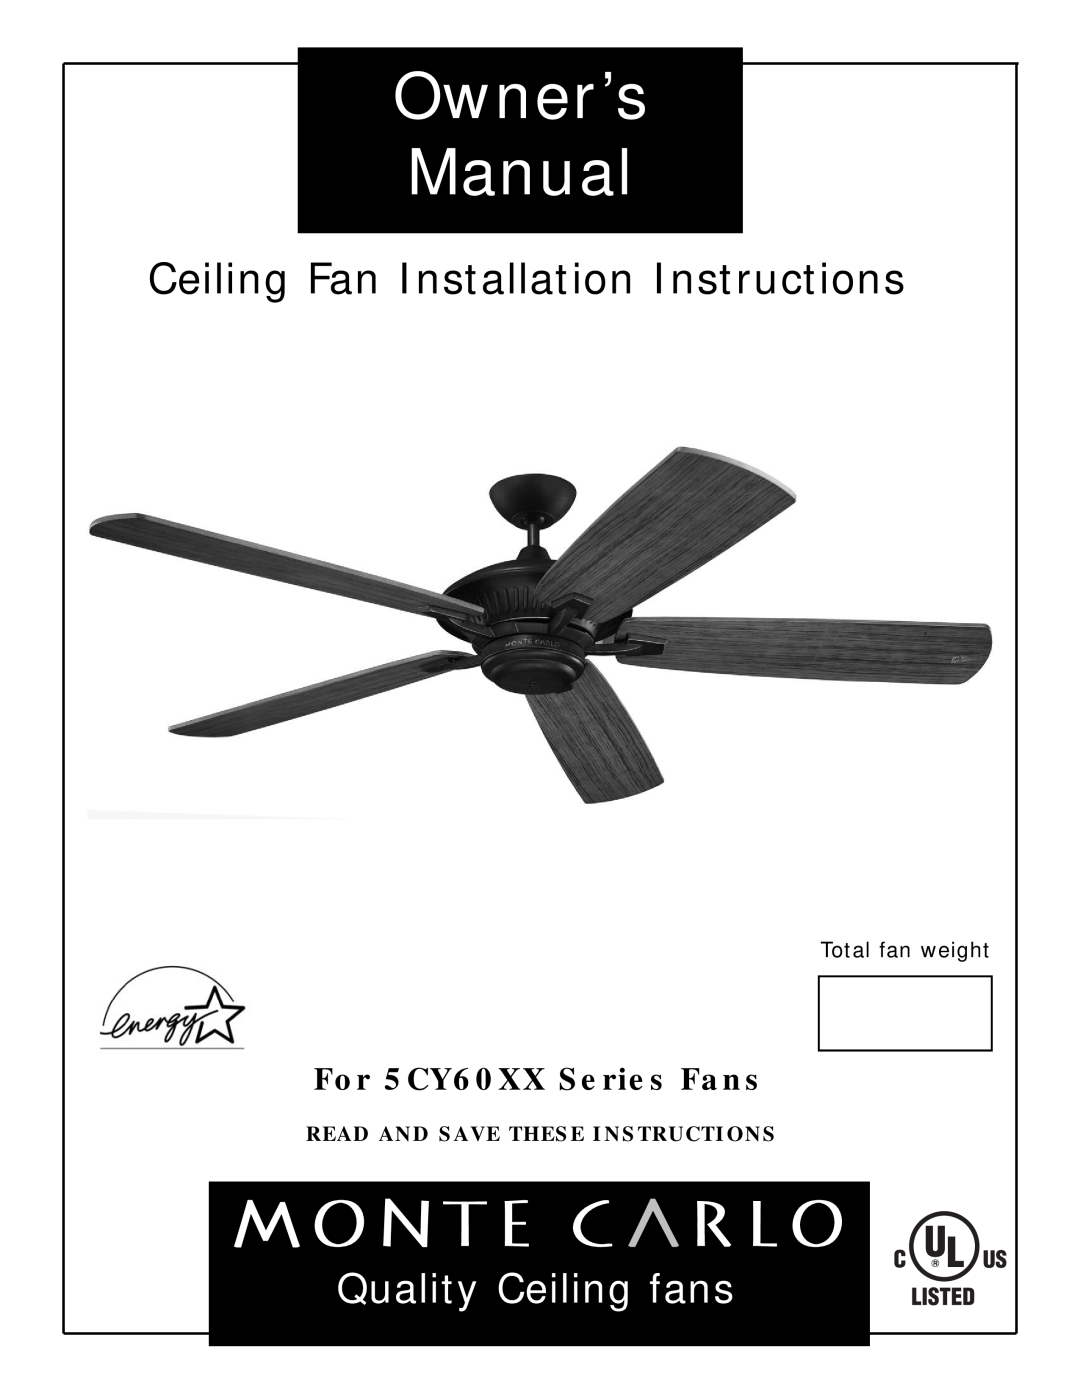 Monte Carlo Fan Company 5CY60XX owner manual Read And Save These Instructions, Ceiling Fan Installation Instructions 